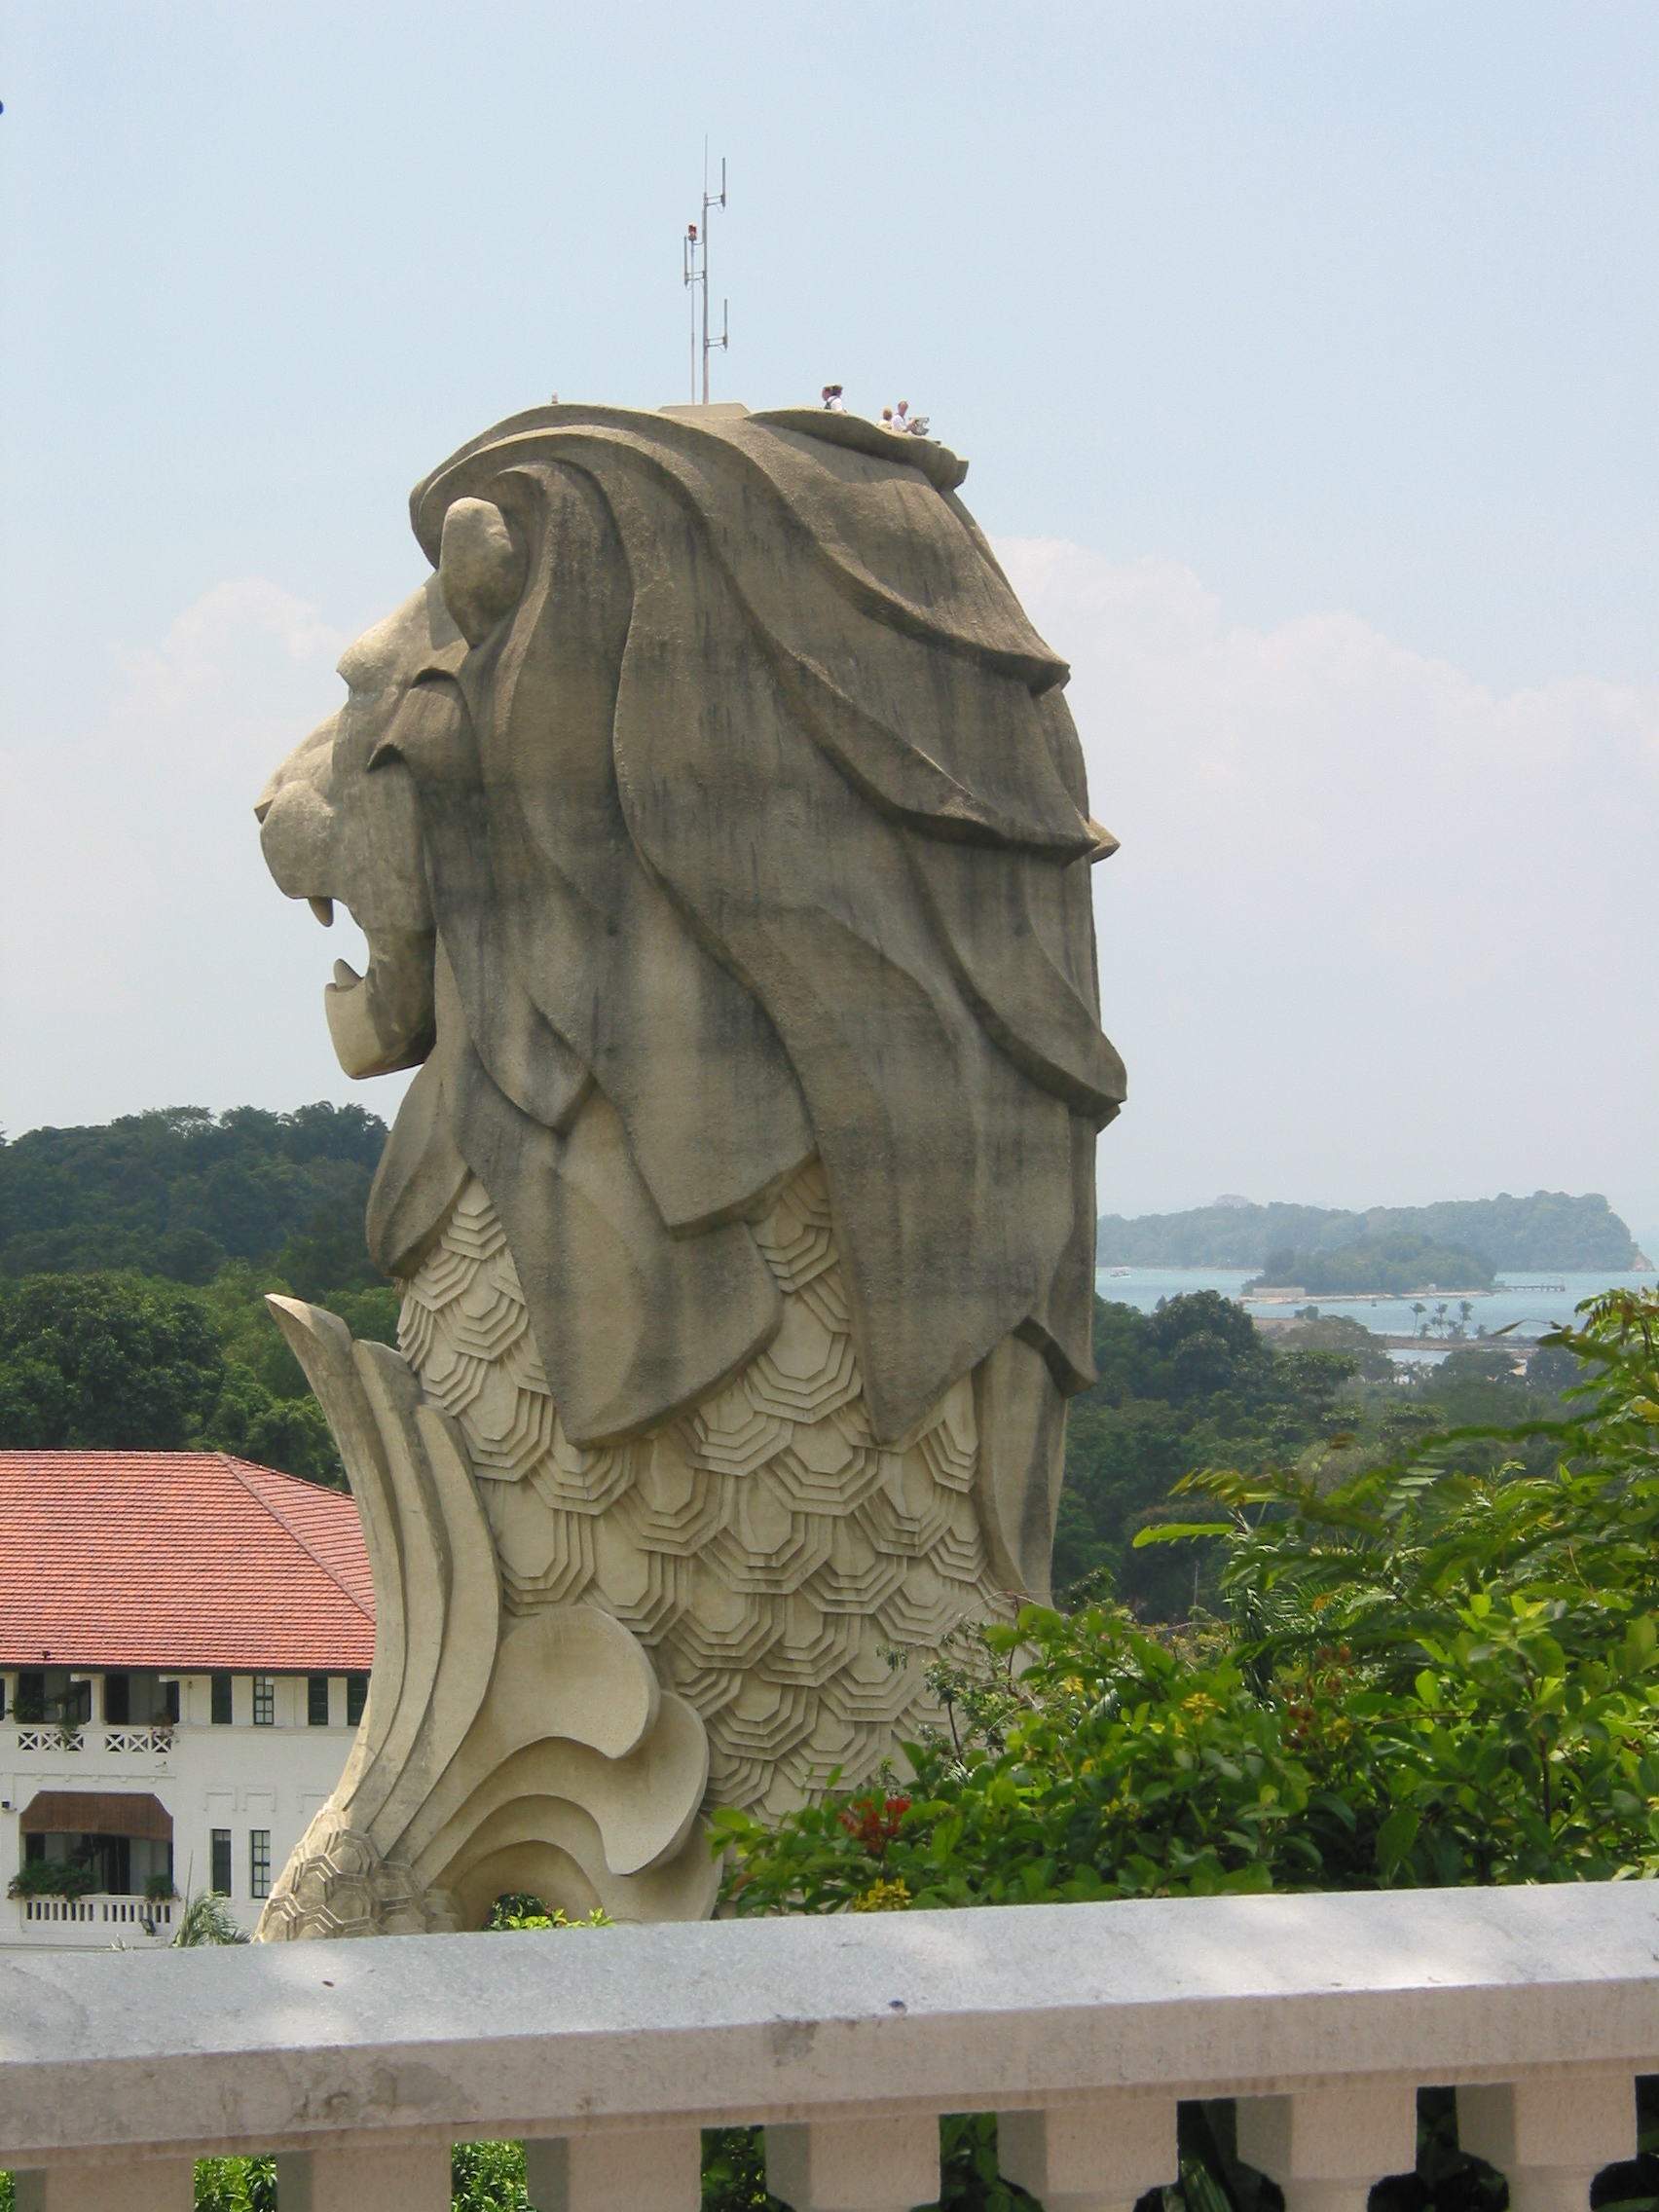 the Merlion (mermaid + lion, don't ask me)